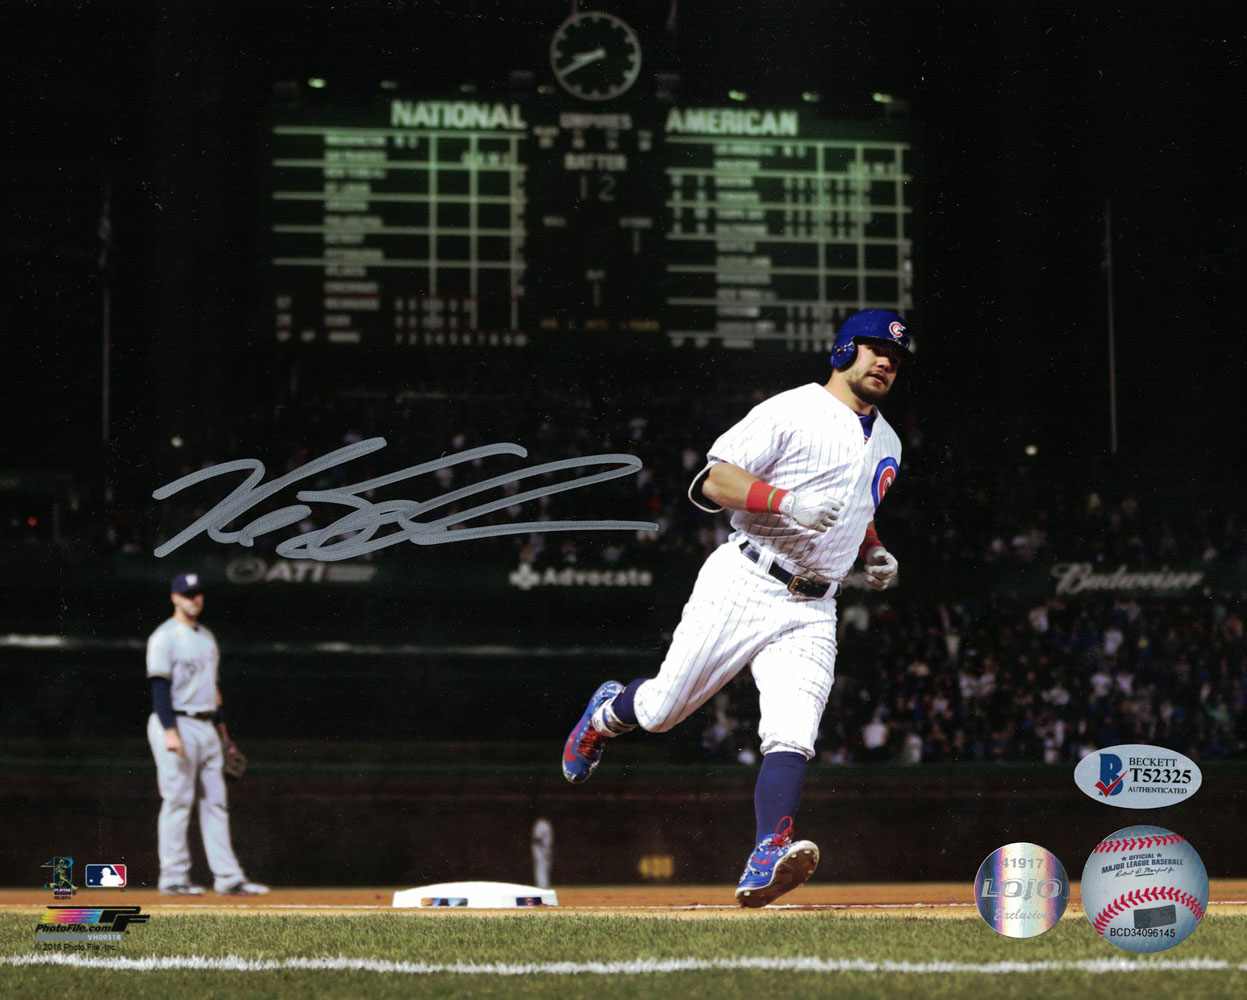 Kyle Schwarber Autographed/Signed Chicago Cubs 8x10 Photo BAS 27301 PF